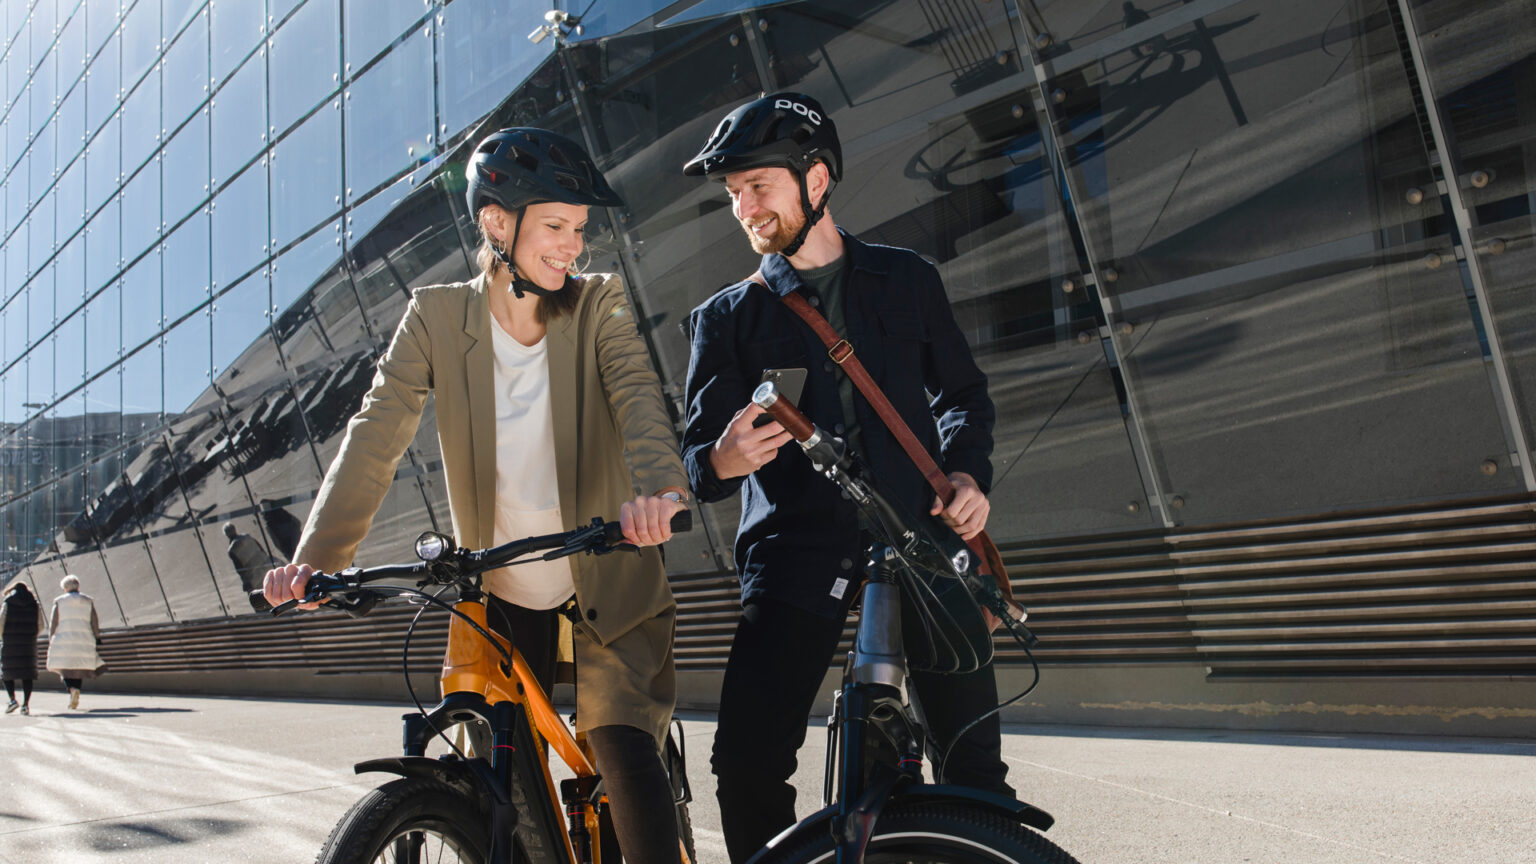 An e-bike navigation app that reliably shows the range of your battery in addition to charging stations on the route would be enormously helpful.